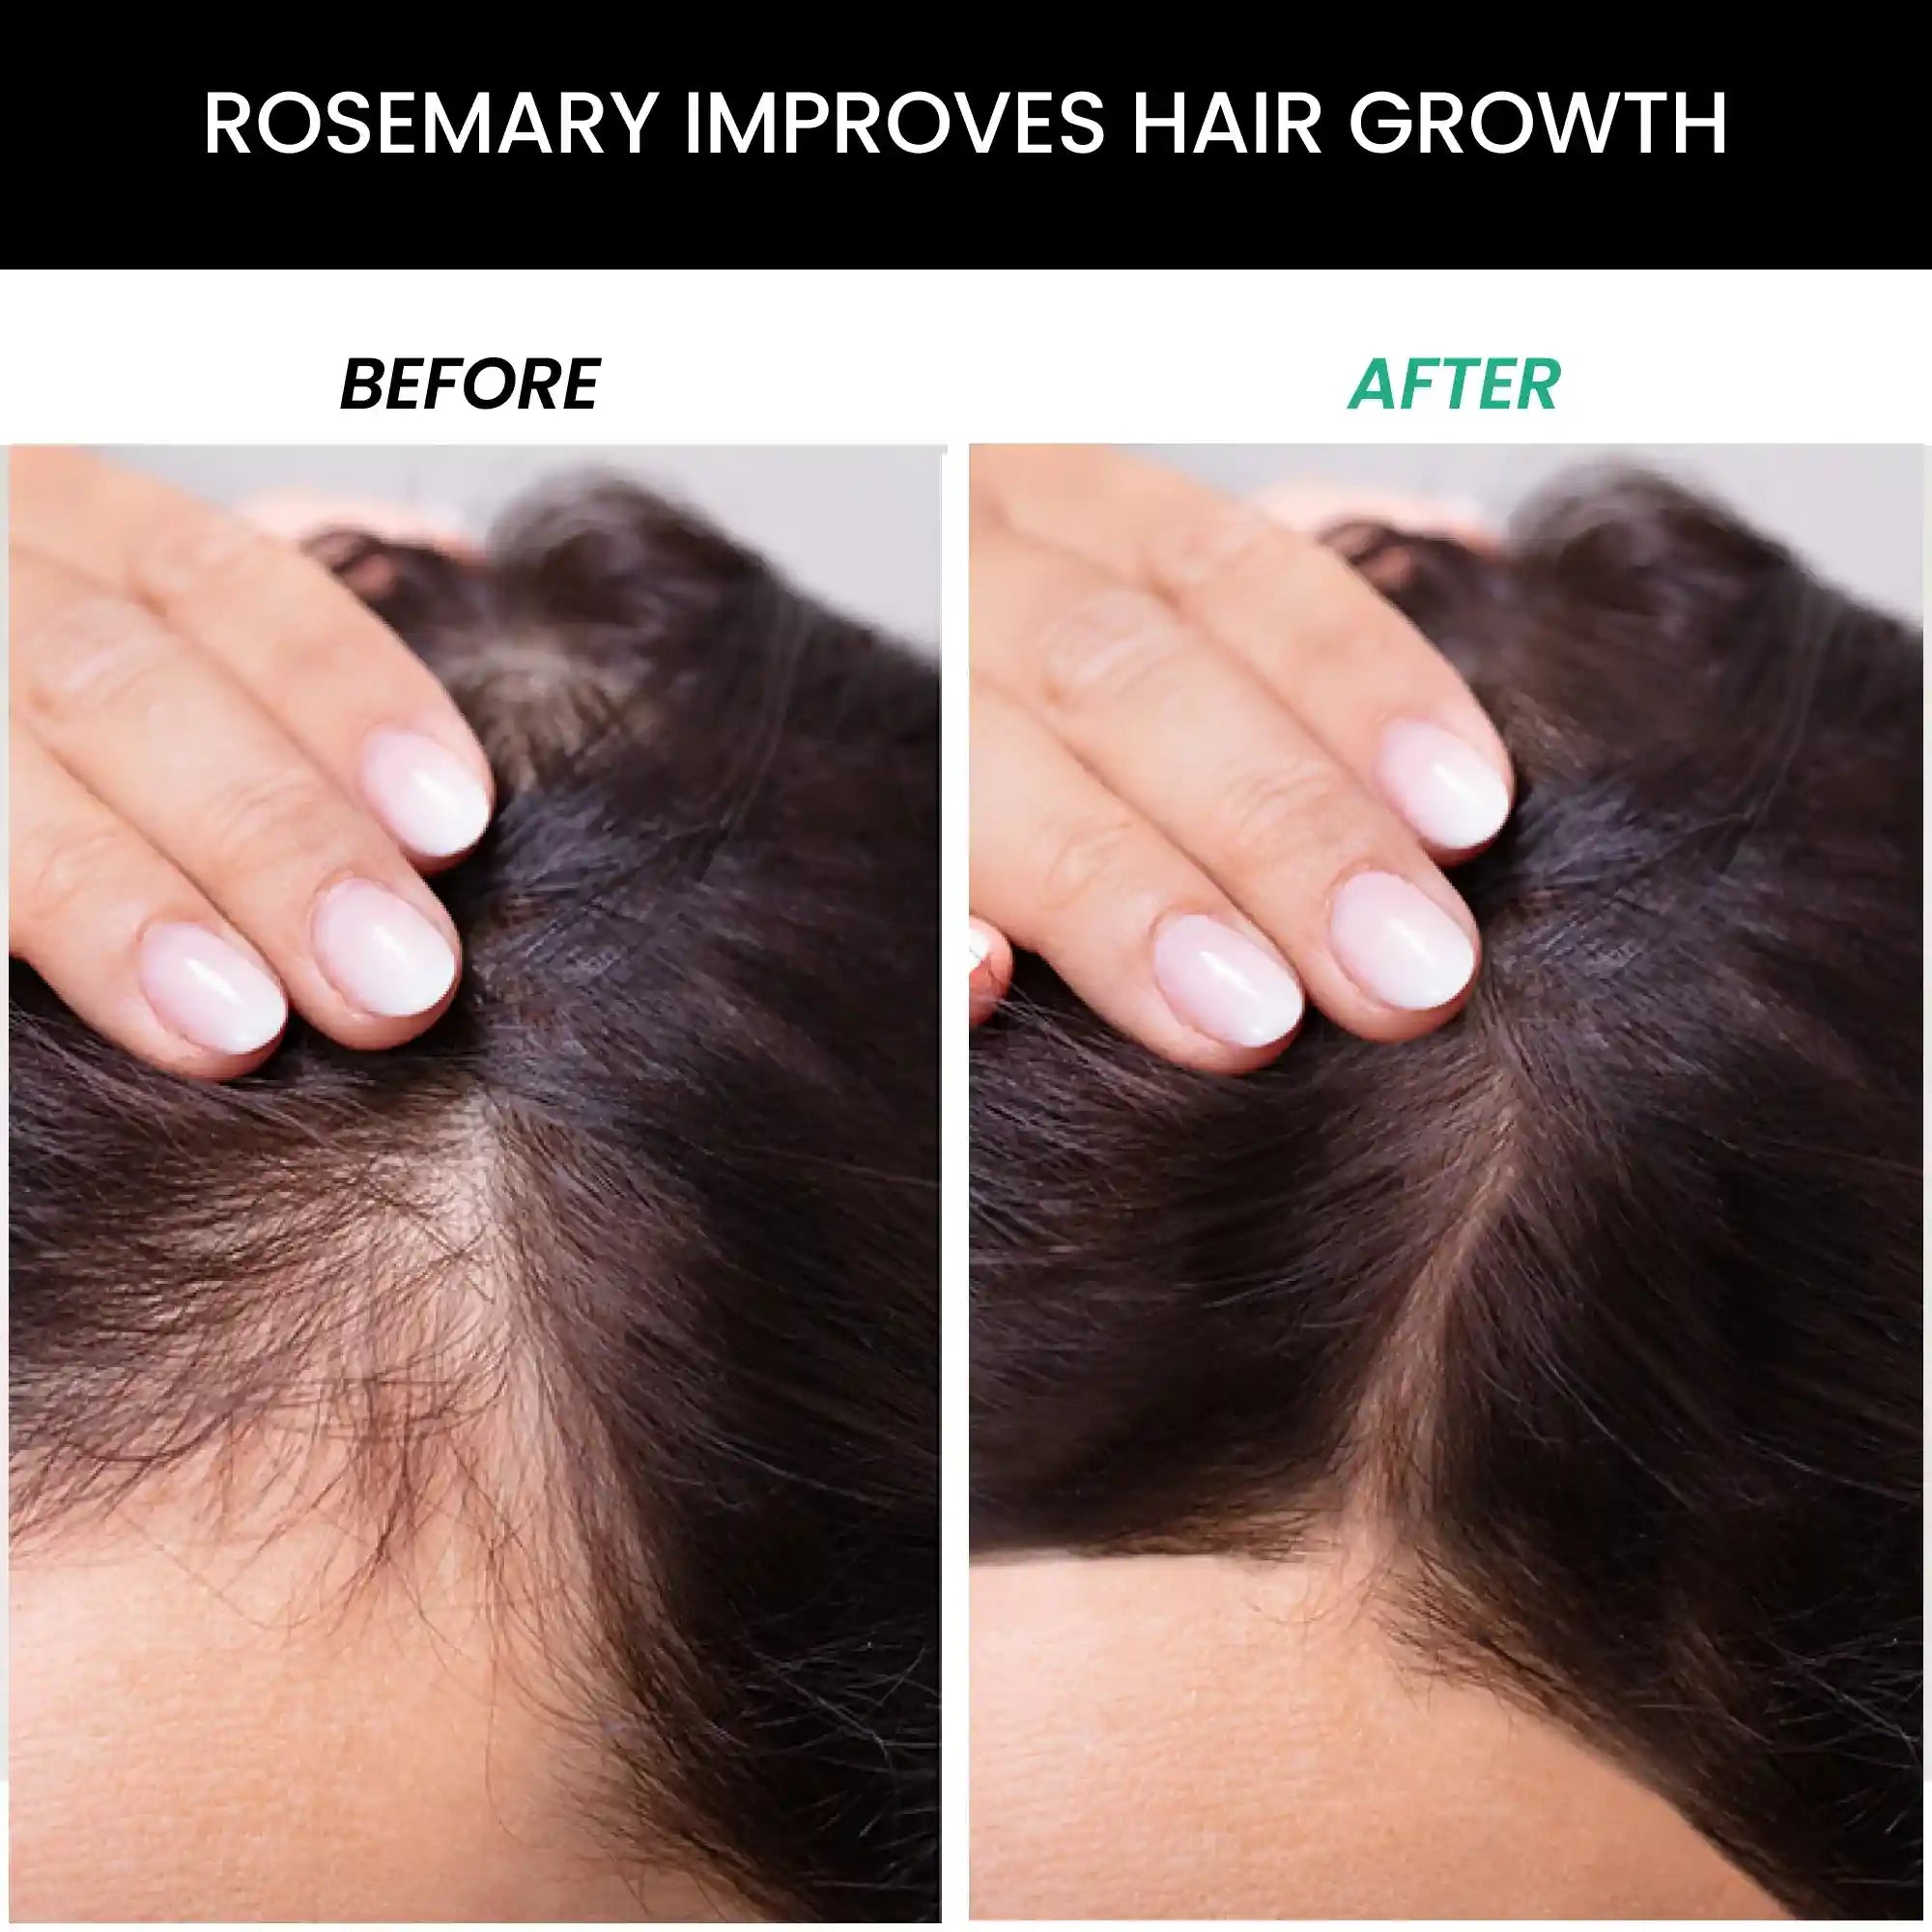 before and after results of using rosemary for hair growth